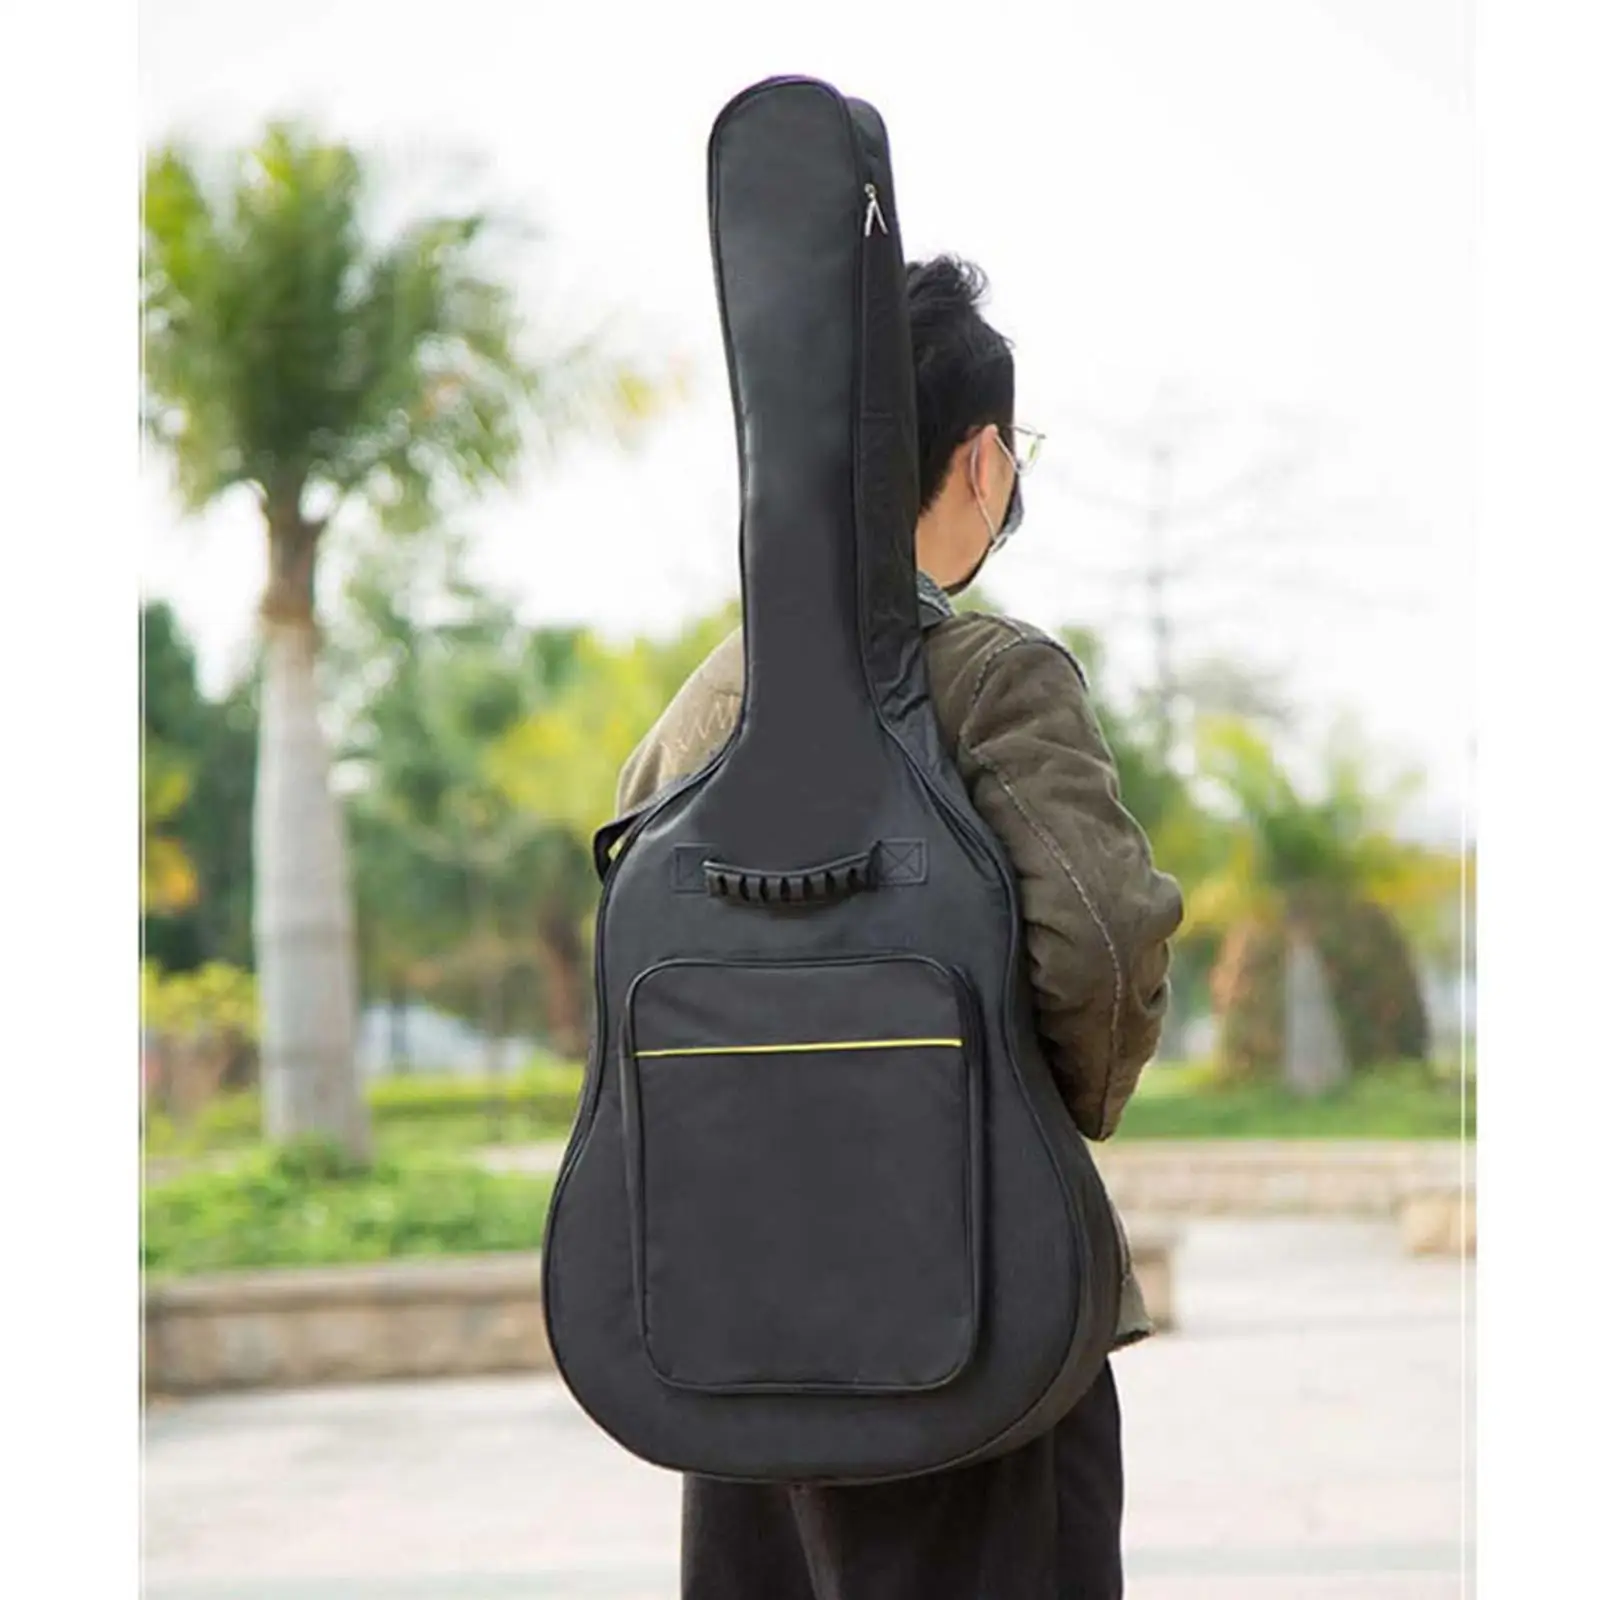 39 Inch Acoustic Guitar bag Padding Thick Waterproof Oxford Fabric Guitar Carry Case for storage Adjustable Straps Black